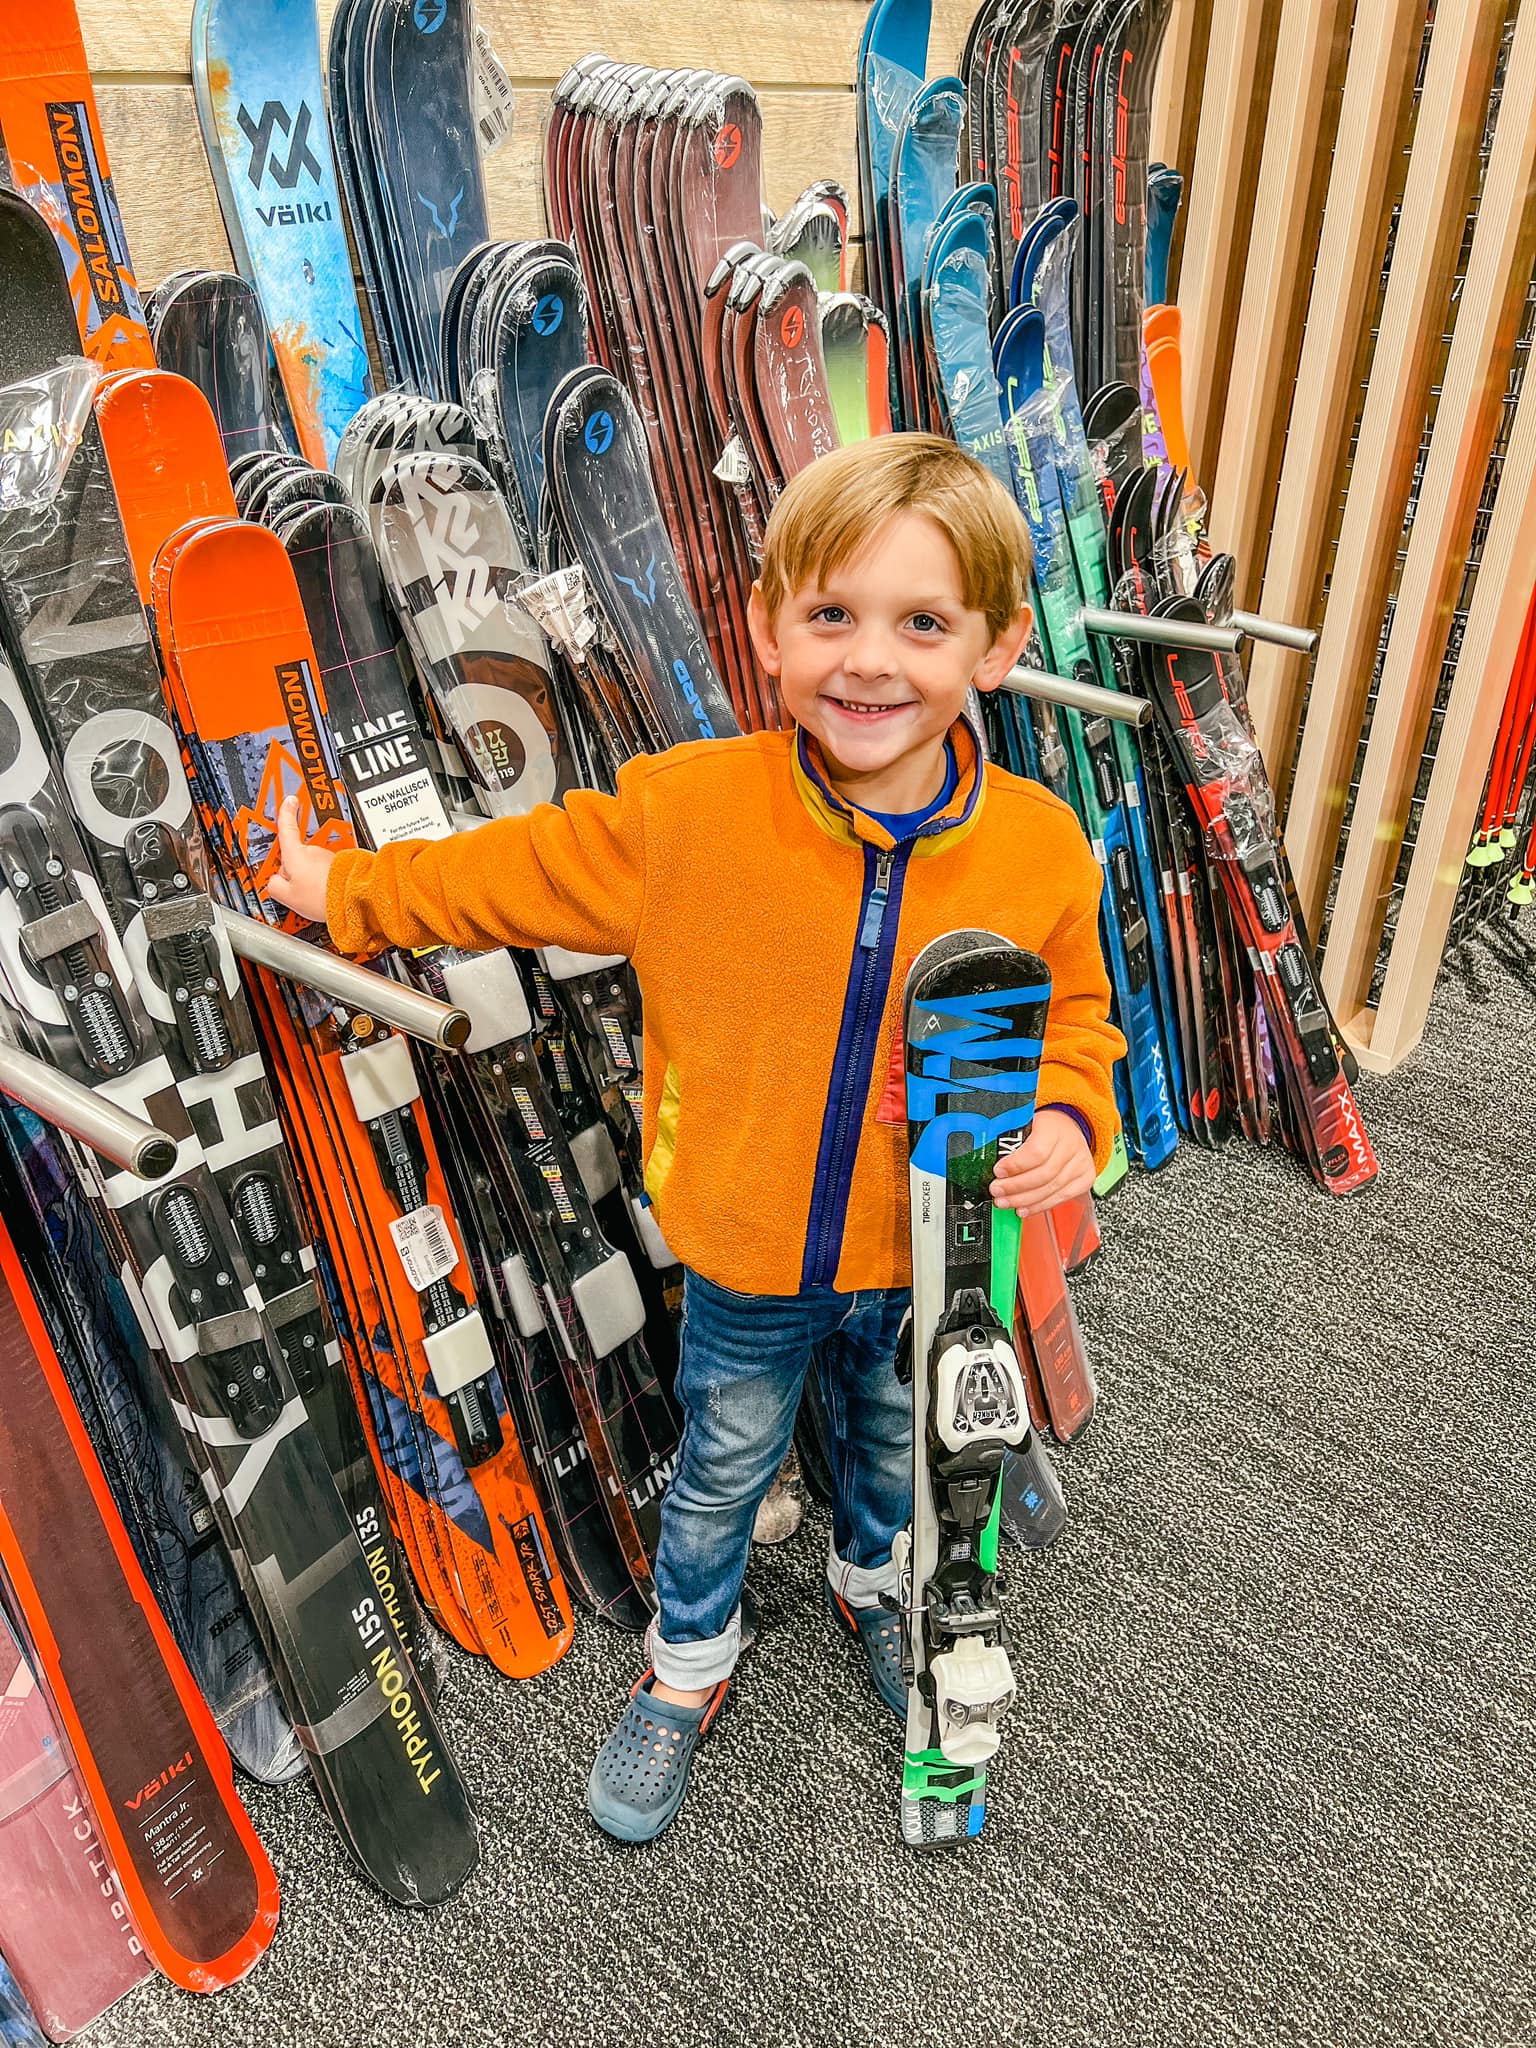 How to Buy/Trade Skis for Kids in Grand Rapids